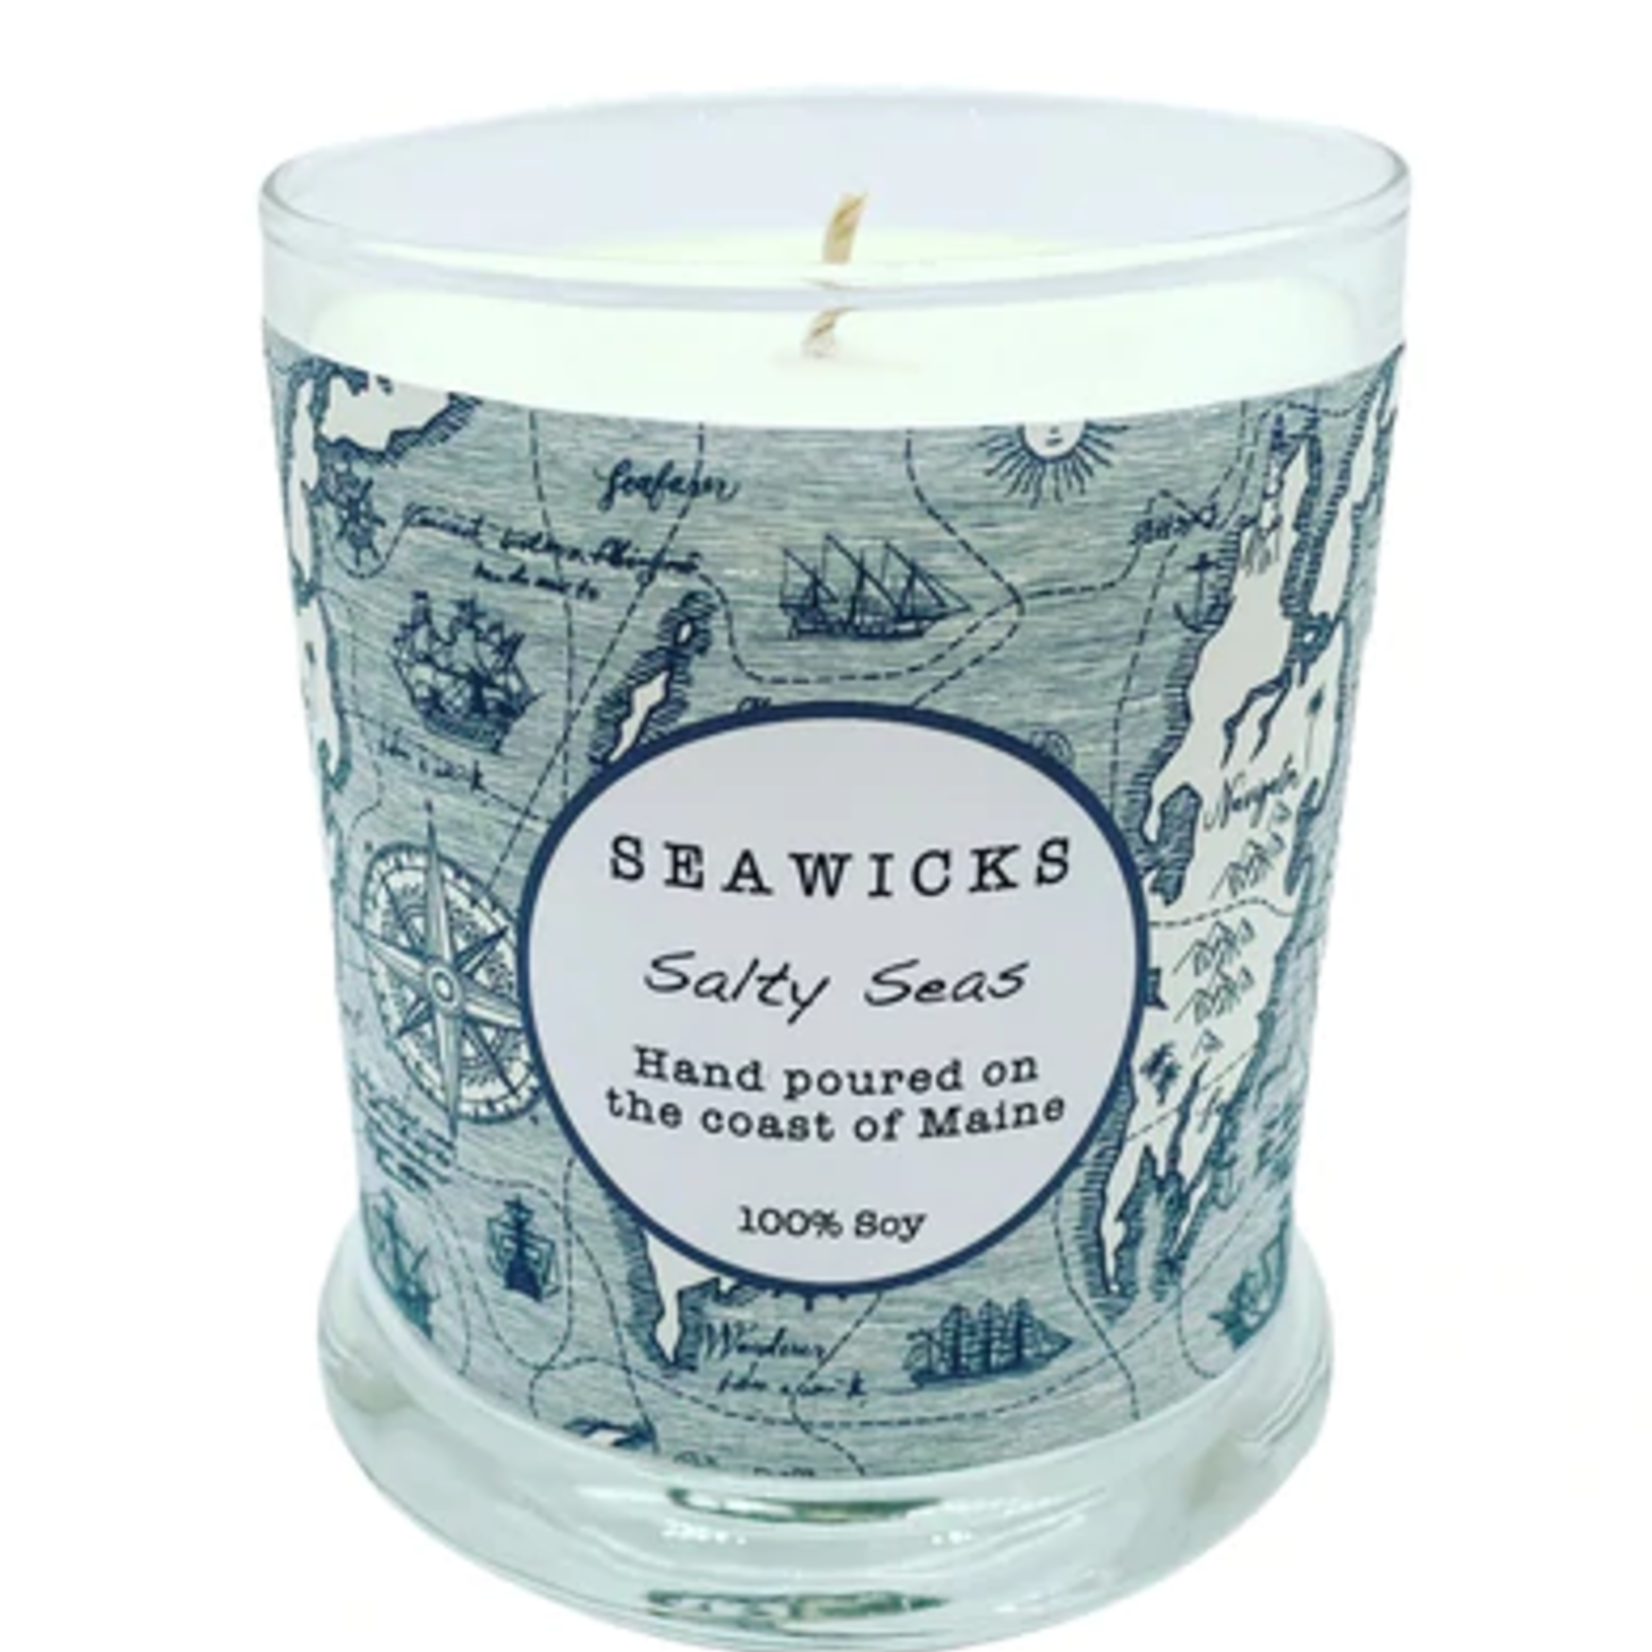 Salty Seas Soy Candle